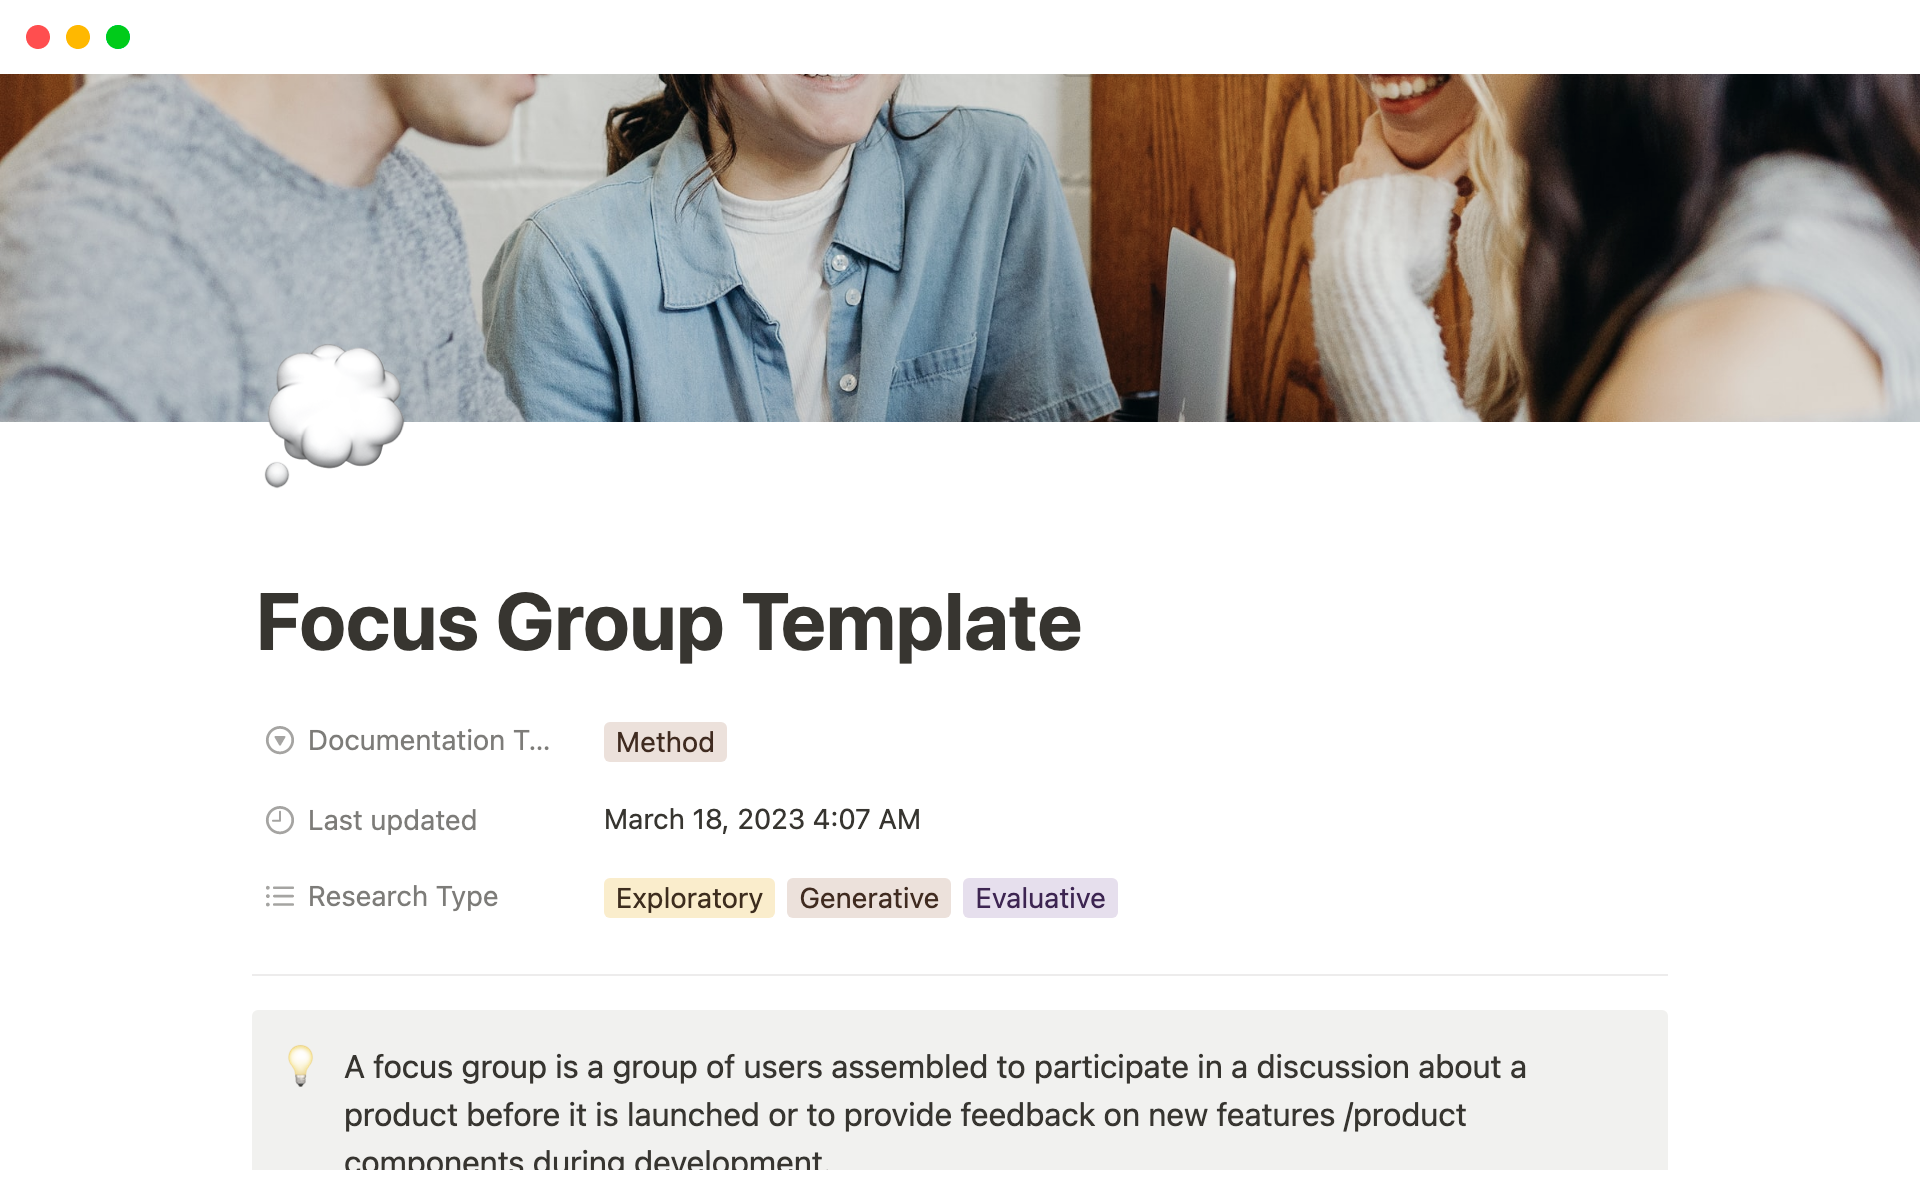 This template helps UX Researchers plan and set up a focus group as part of a research project